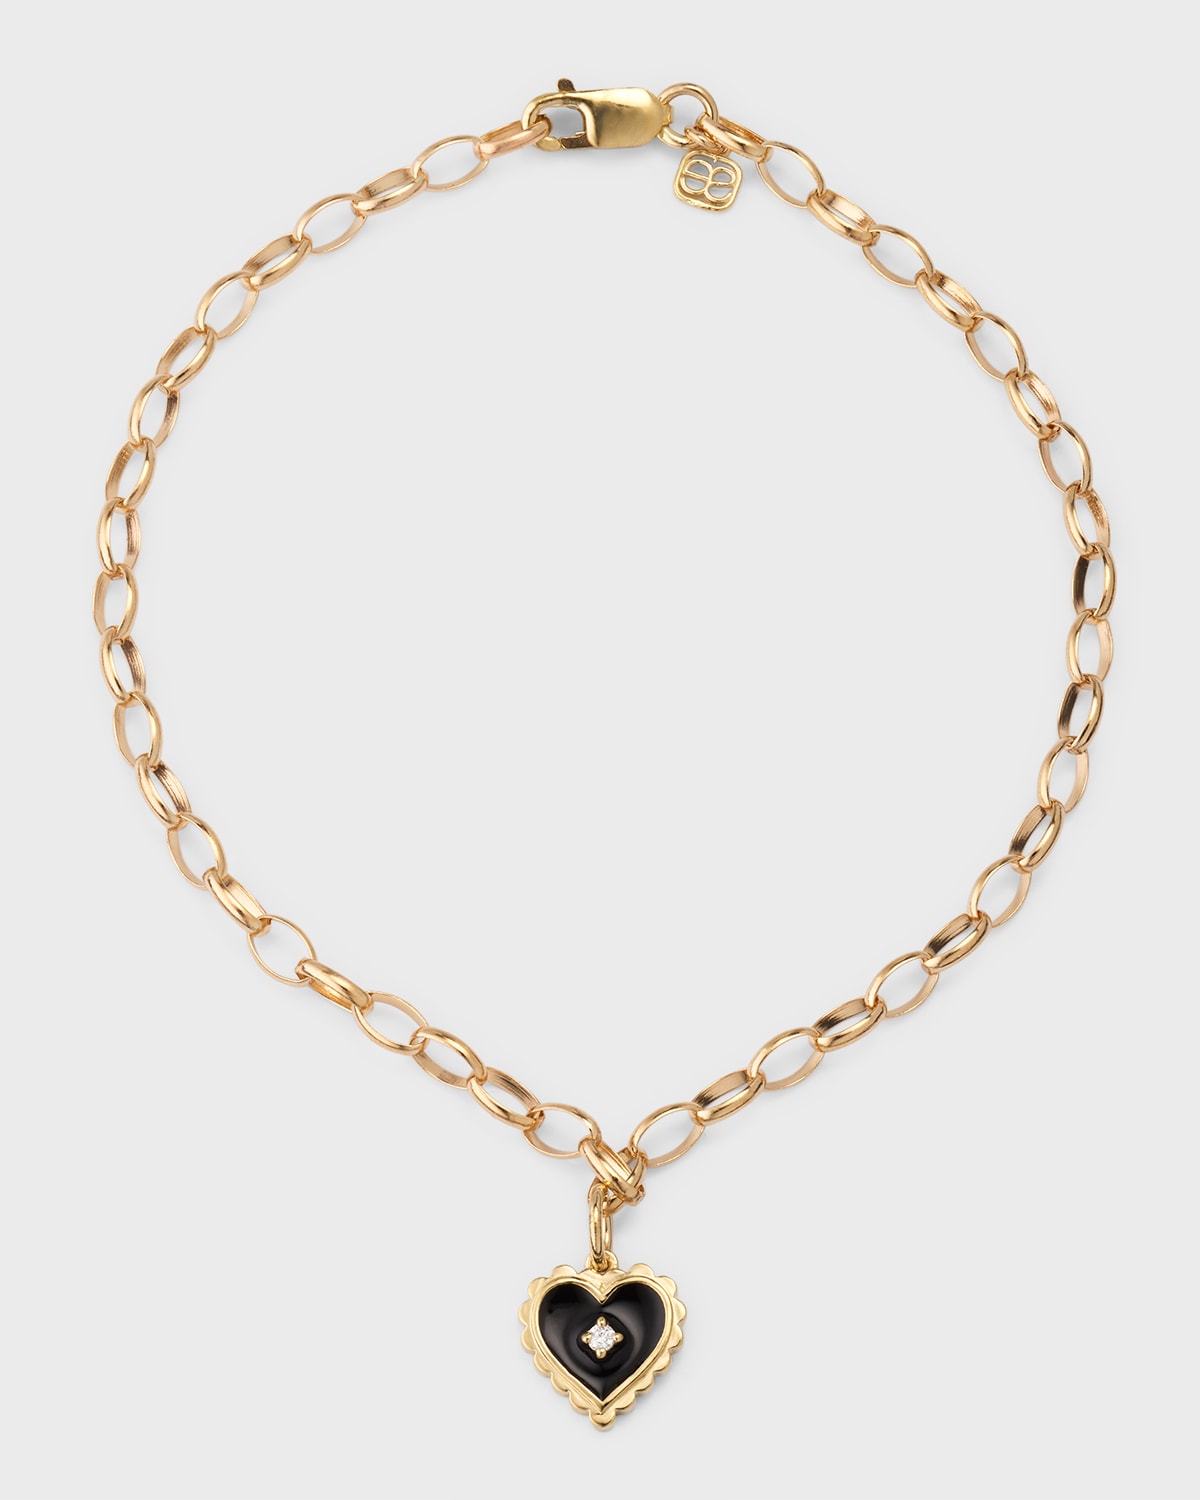 Sydney Evan Prong Set Black Enamel Heart Charm Necklace With Scallop Border In Gold